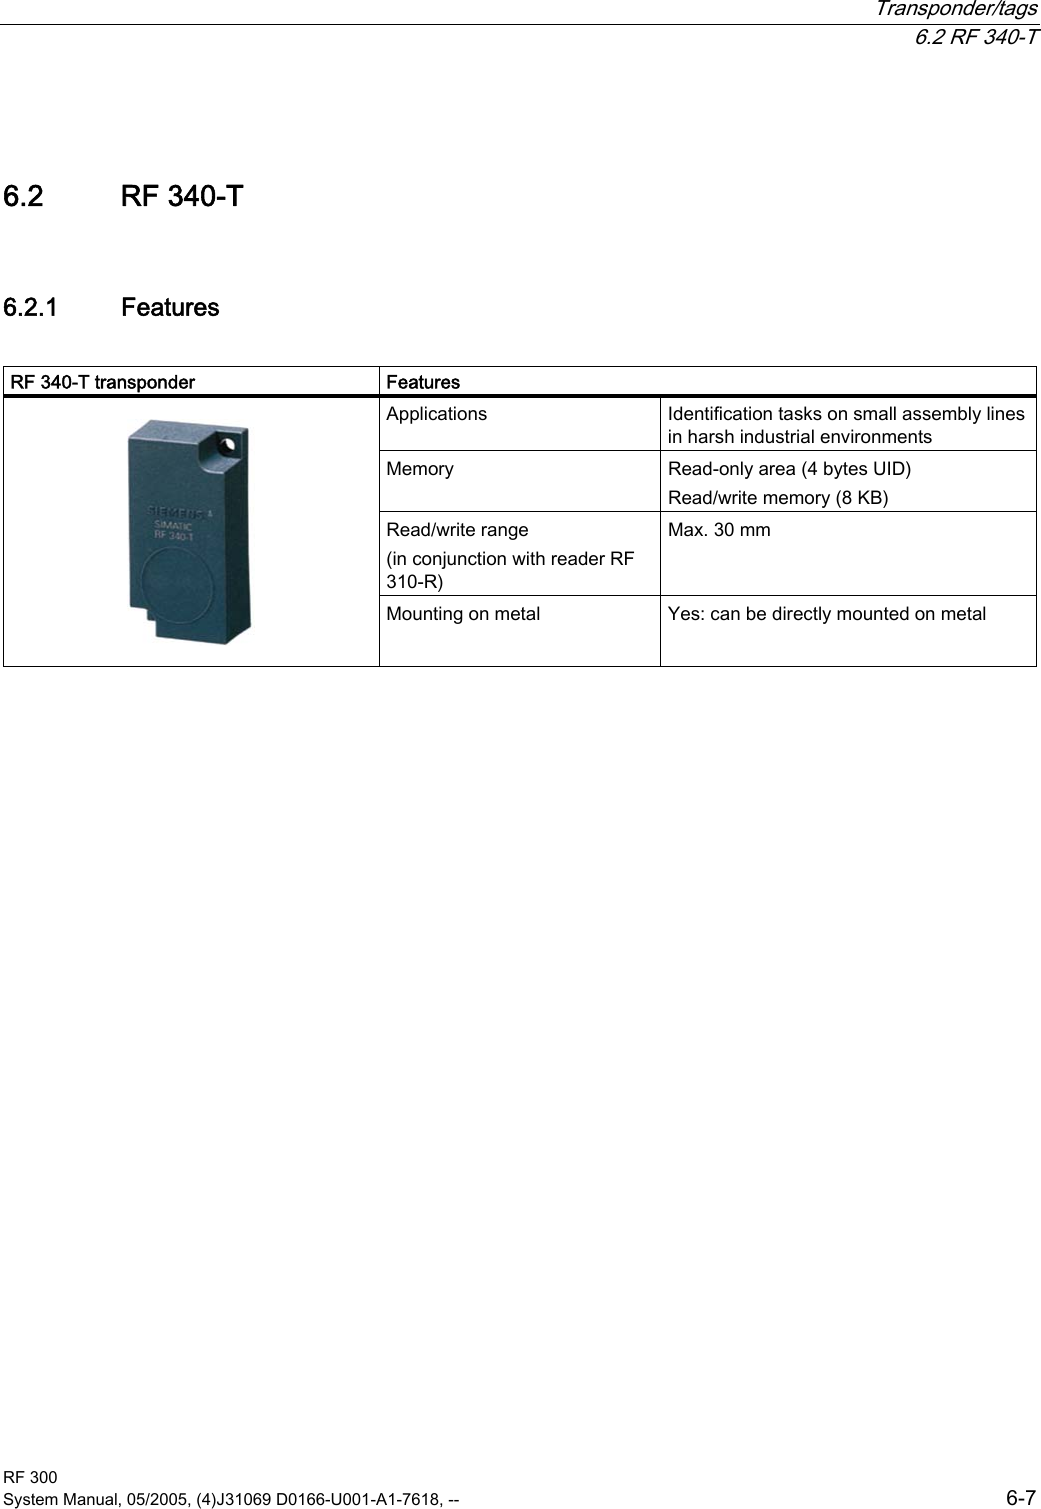  Transponder/tags  6.2 RF 340-T RF 300 System Manual, 05/2005, (4)J31069 D0166-U001-A1-7618, --  6-7 6.2  6.2 RF 340-T 6.2.1  Features  RF 340-T transponder  Features Applications  Identification tasks on small assembly lines in harsh industrial environments Memory  Read-only area (4 bytes UID)  Read/write memory (8 KB)  Read/write range (in conjunction with reader RF 310-R) Max. 30 mm    Mounting on metal  Yes: can be directly mounted on metal  